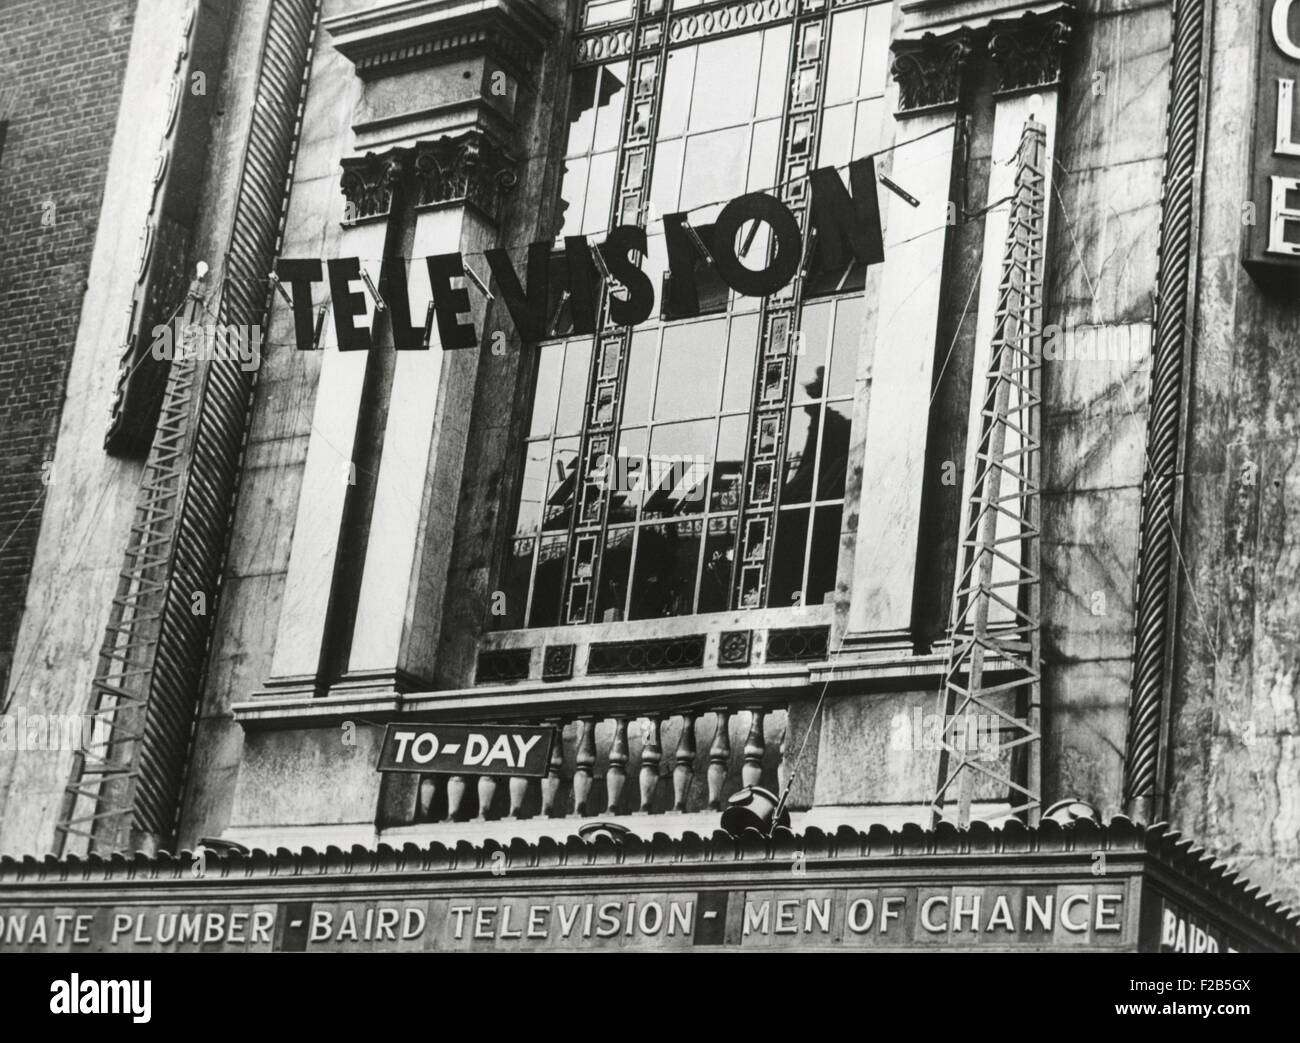 Television was shown for the first time in England, June 1932. The demonstration showed the Epson Derby at the Metropole Cinema. On the theater's marque is 'Baird Television' referring the British television pioneer, John Logie Baird. - (BSLOC 2014 17 133) Stock Photo